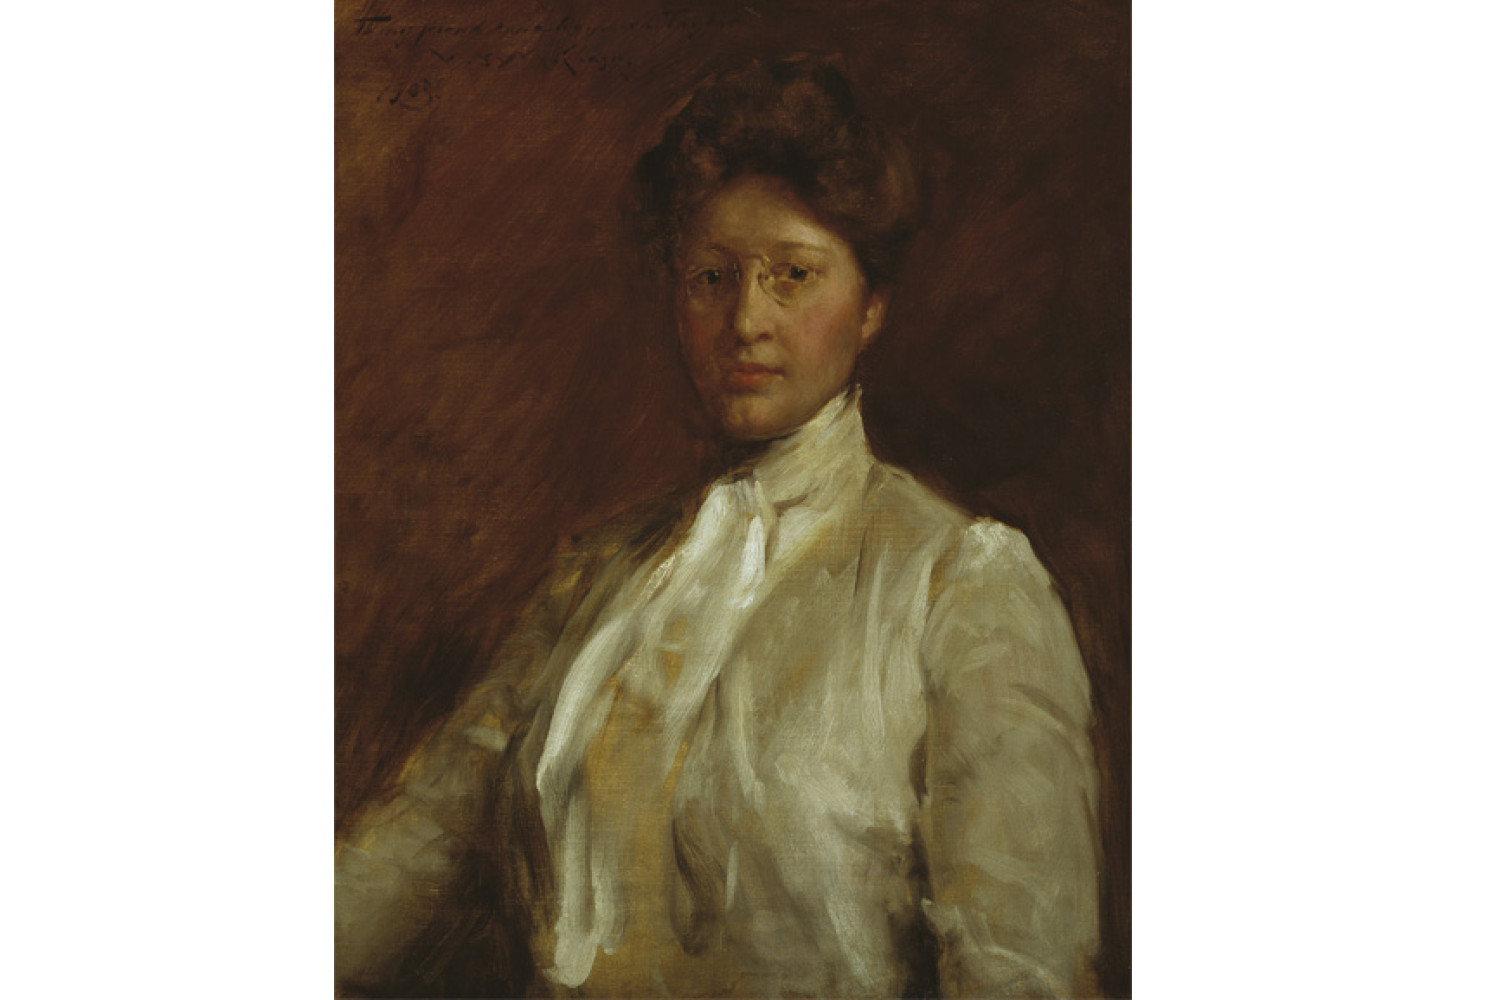 Anna Heyward Taylor (1879 - 1956), 1903, By William Merritt Chase (American, 1849—1916); Oil on canvas; 30 1/4 x 24 inches; Gift of Anna Heyward Taylor; 1937.003.0001
